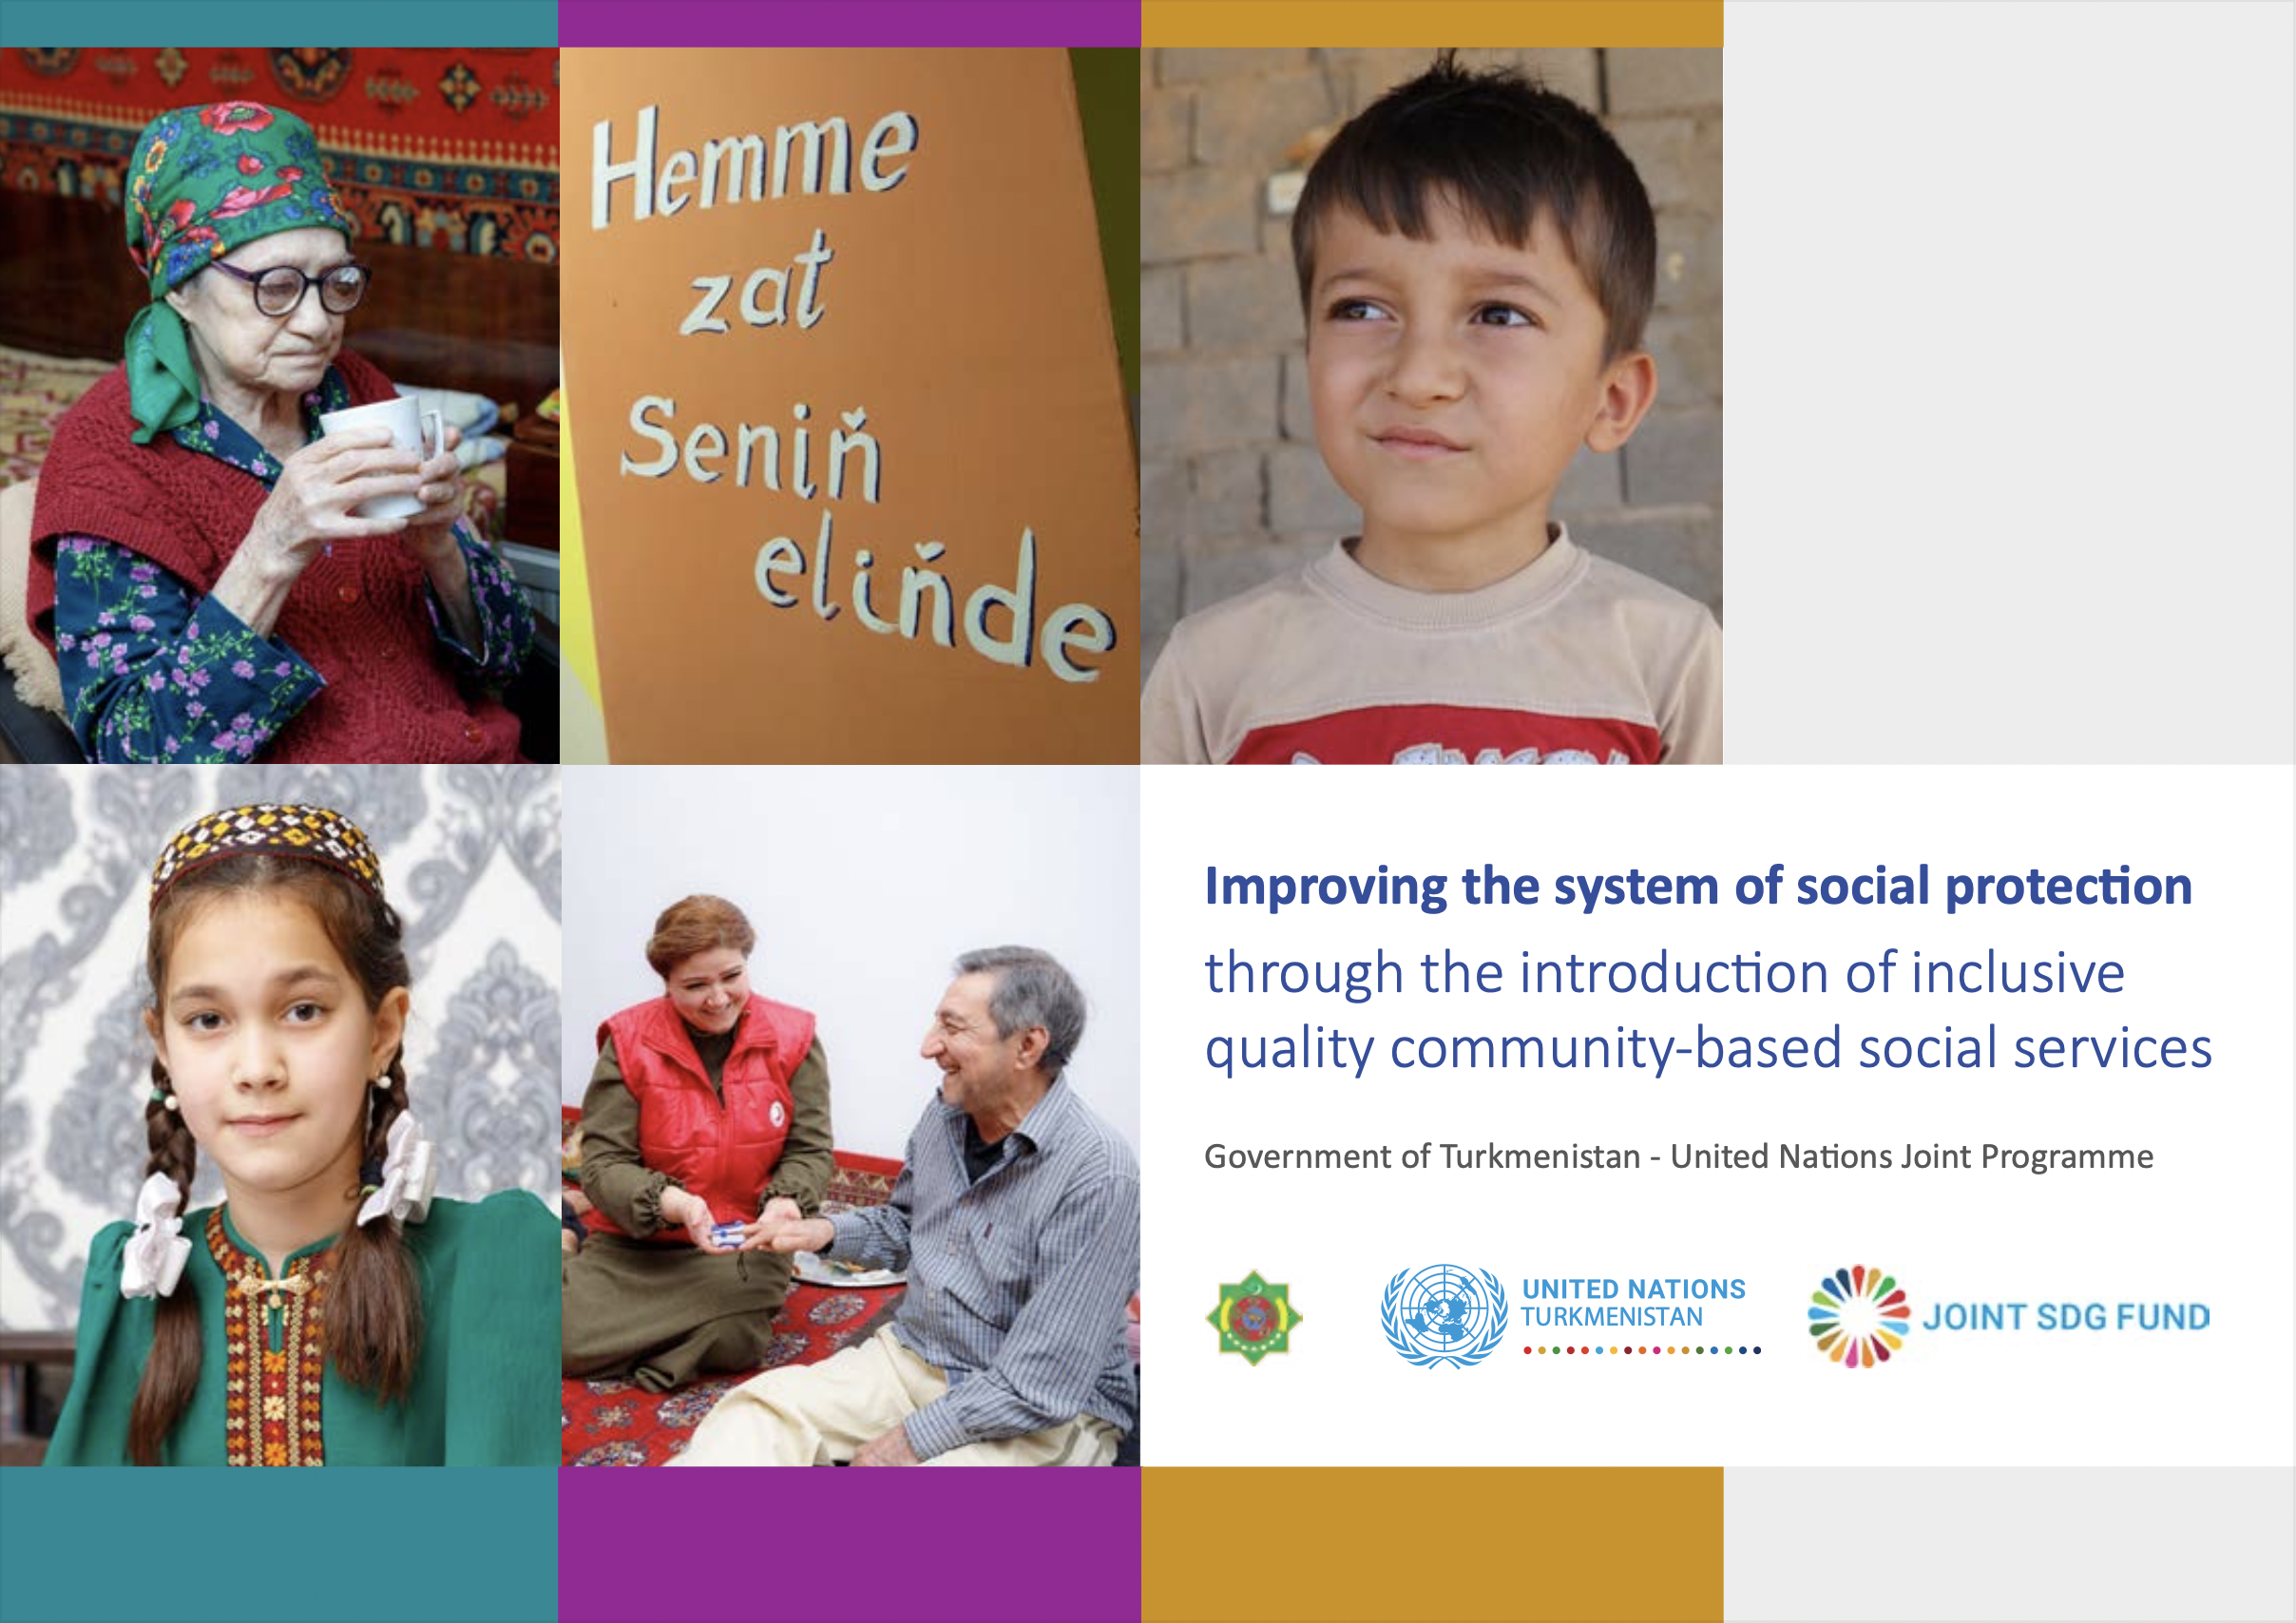 Improving the system of social protection through the introduction of inclusive quality community-based social services